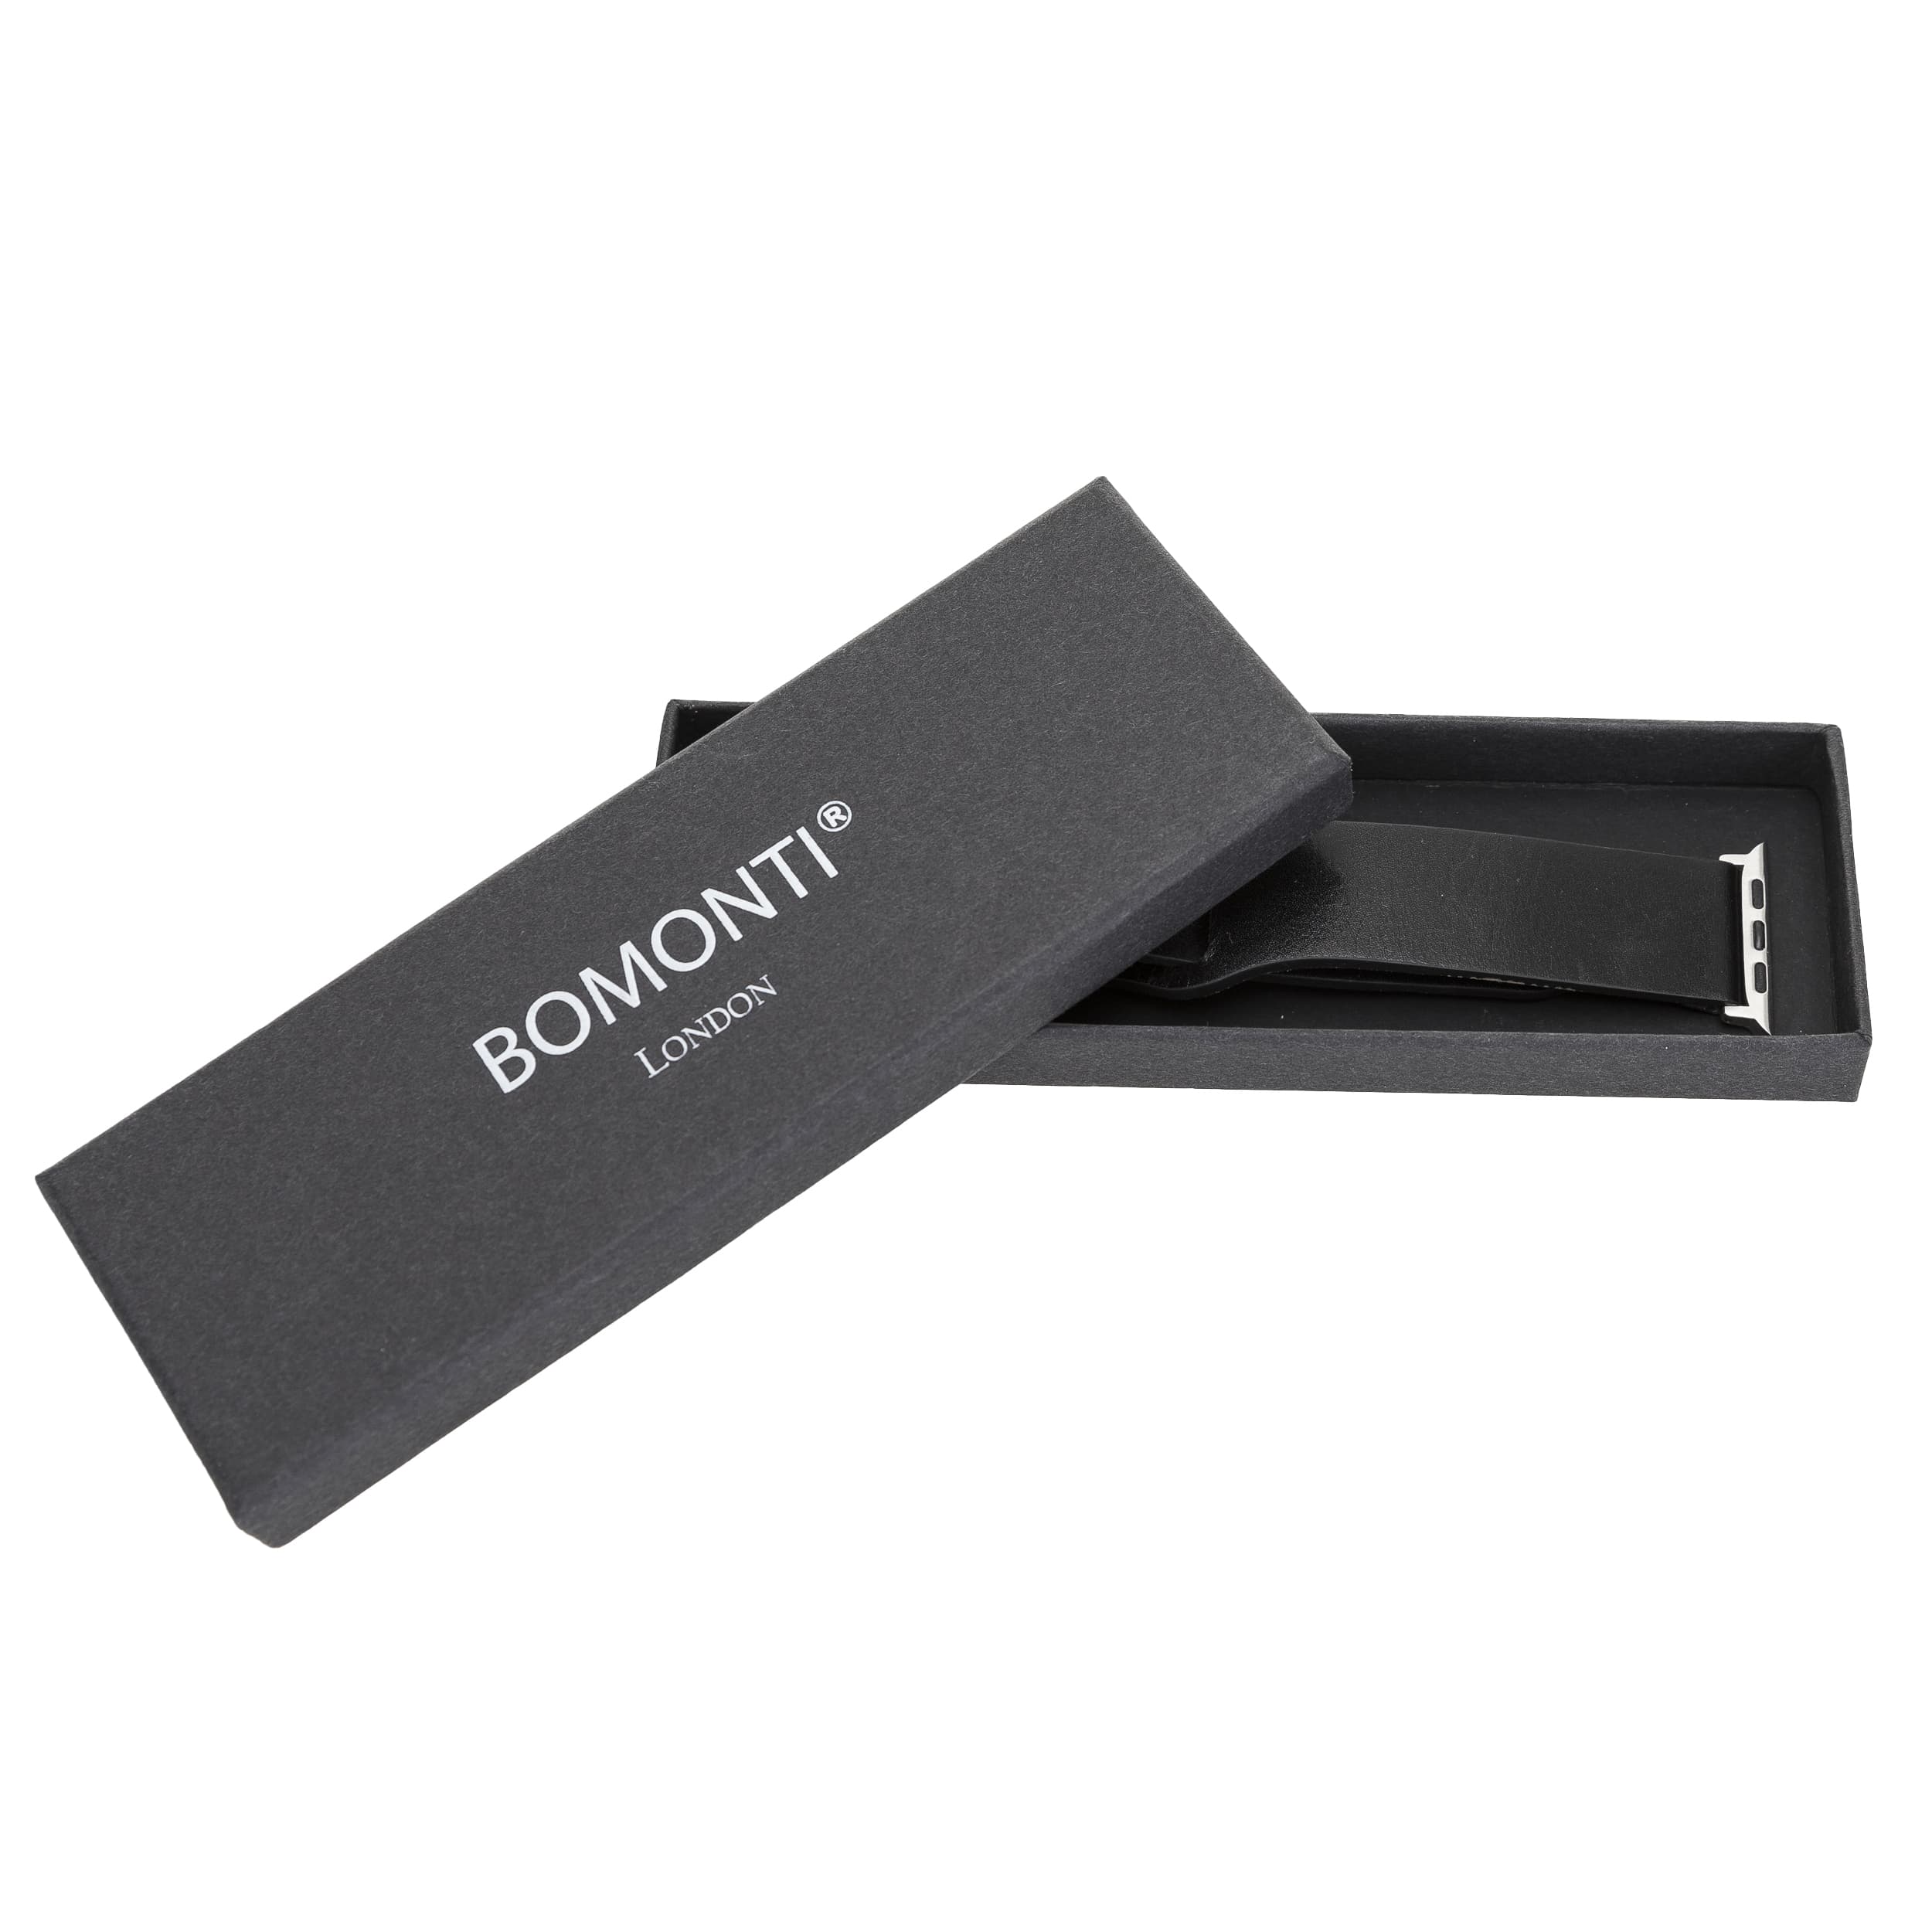 Hackney Black Genuine Leather Apple Watch Band Strap 38mm 40mm 42mm 44mm 45mm for All Series - Bomonti - 7